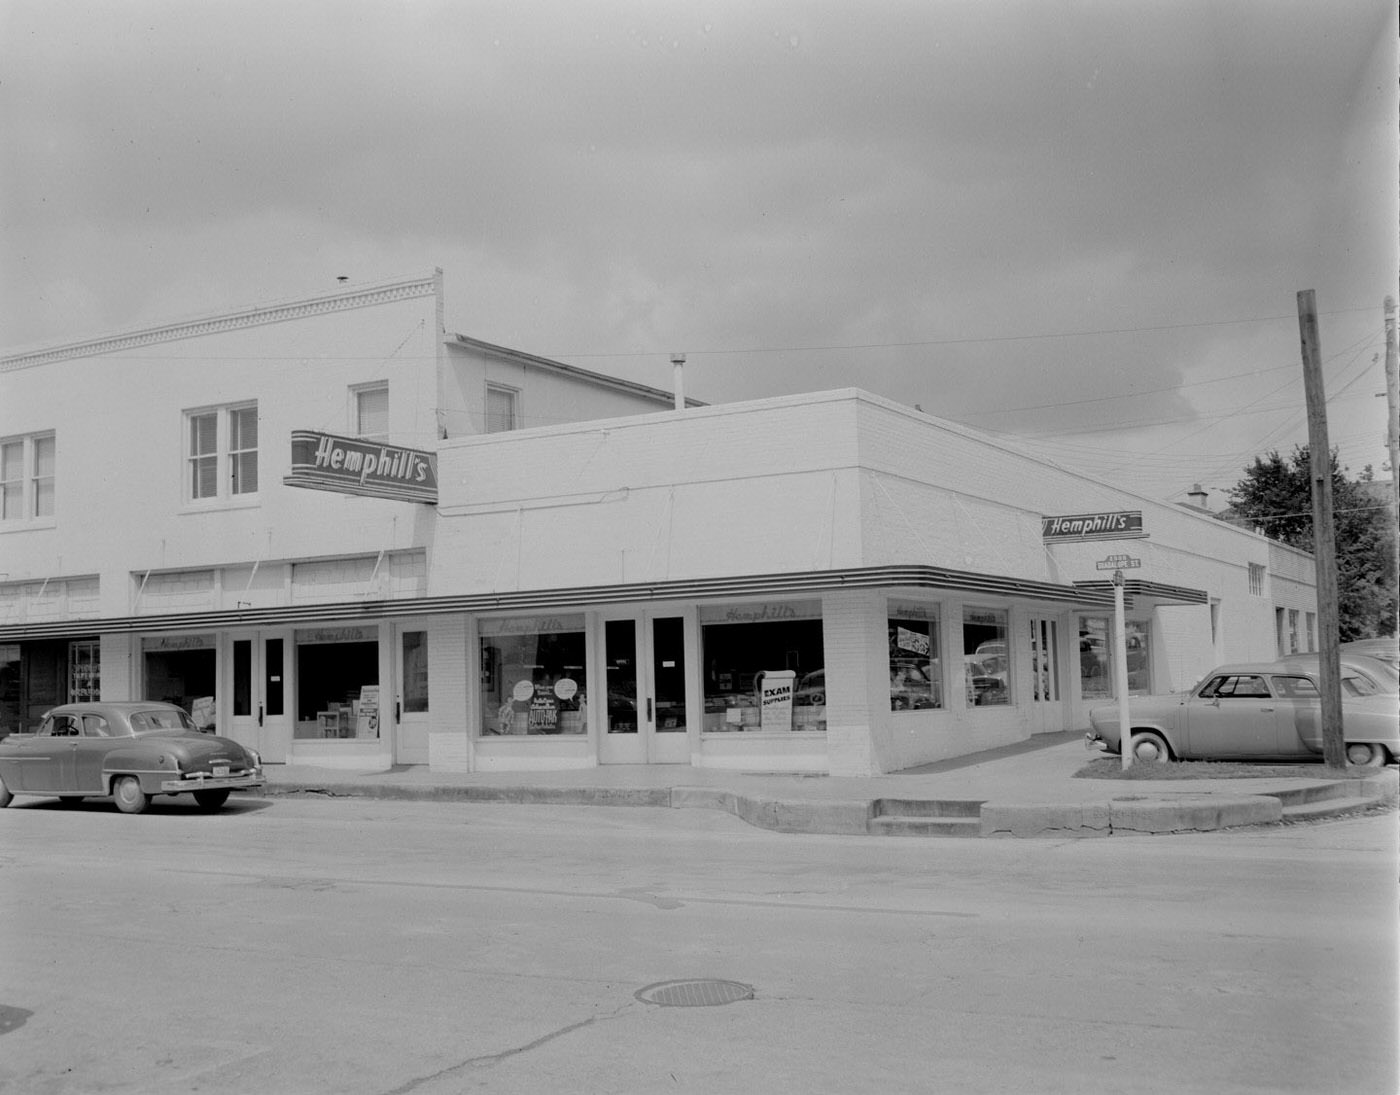 Hemphill Bookstore at 25th and Guadalupe, Austin, Texas, 1951.